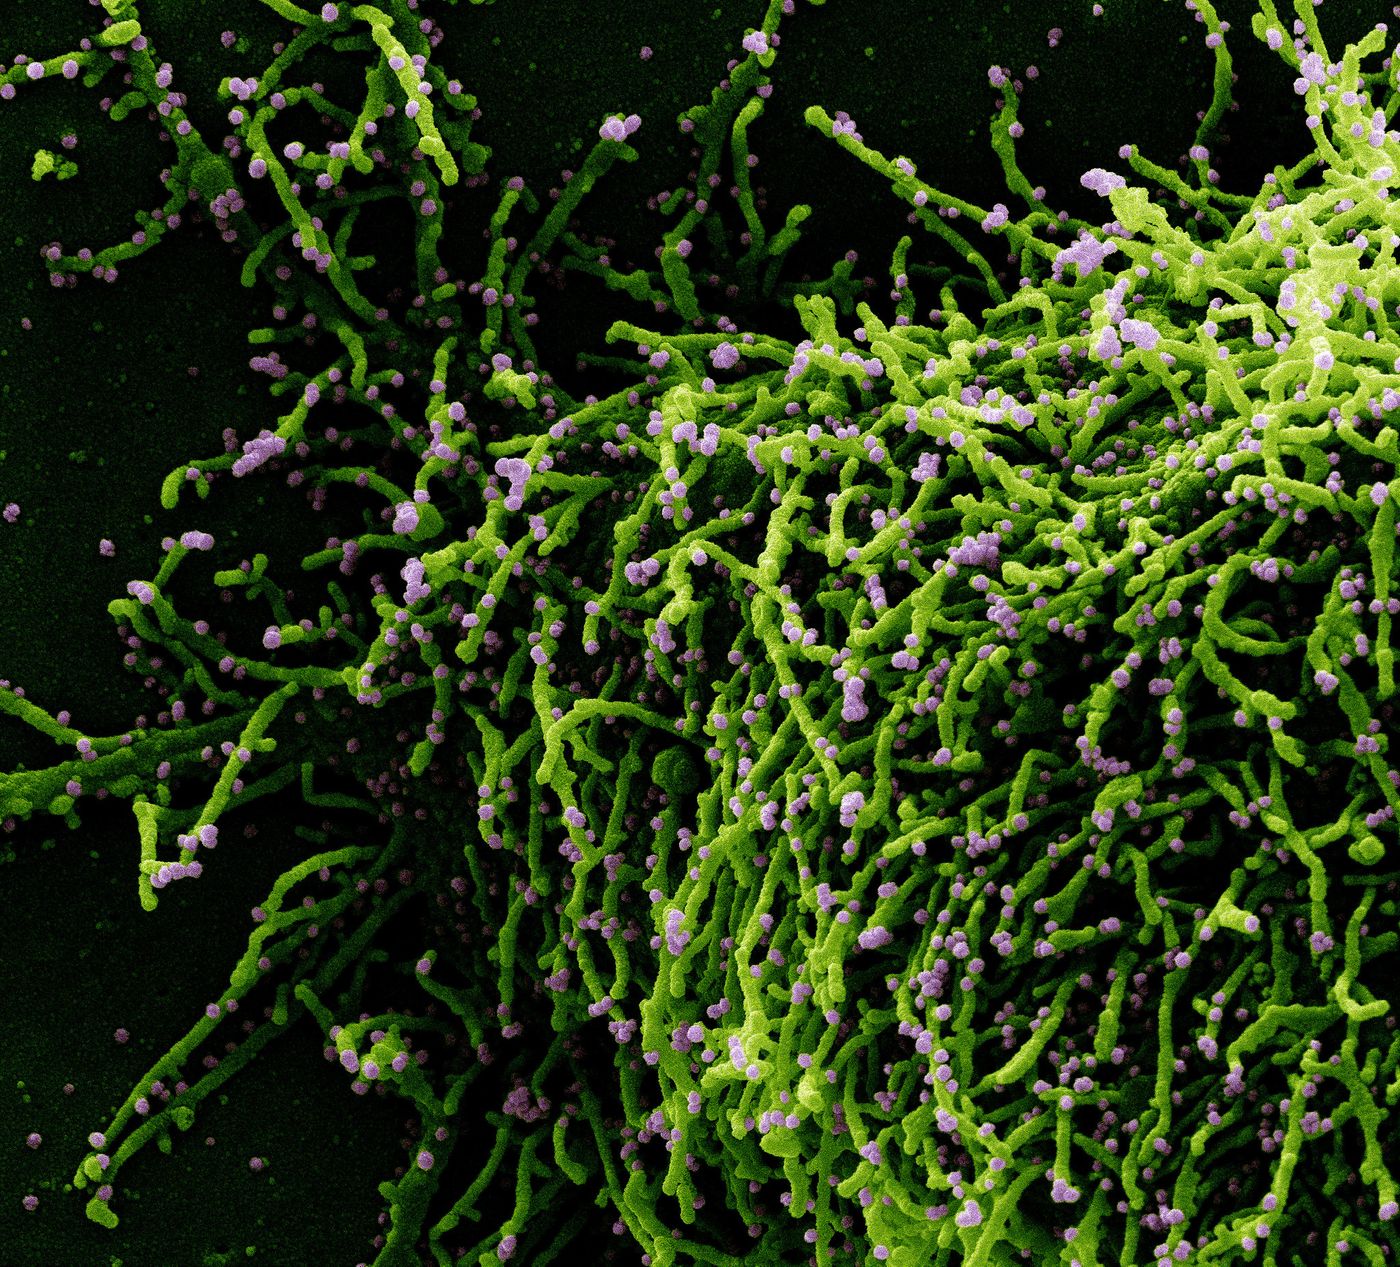 Colorized scanning electron micrograph of a cell (green) infected with a variant strain of SARS-CoV-2 virus particles (purple), isolated from a patient sample. Image captured at the NIAID Integrated Research Facility (IRF) in Fort Detrick, Maryland. Credit: NIAID